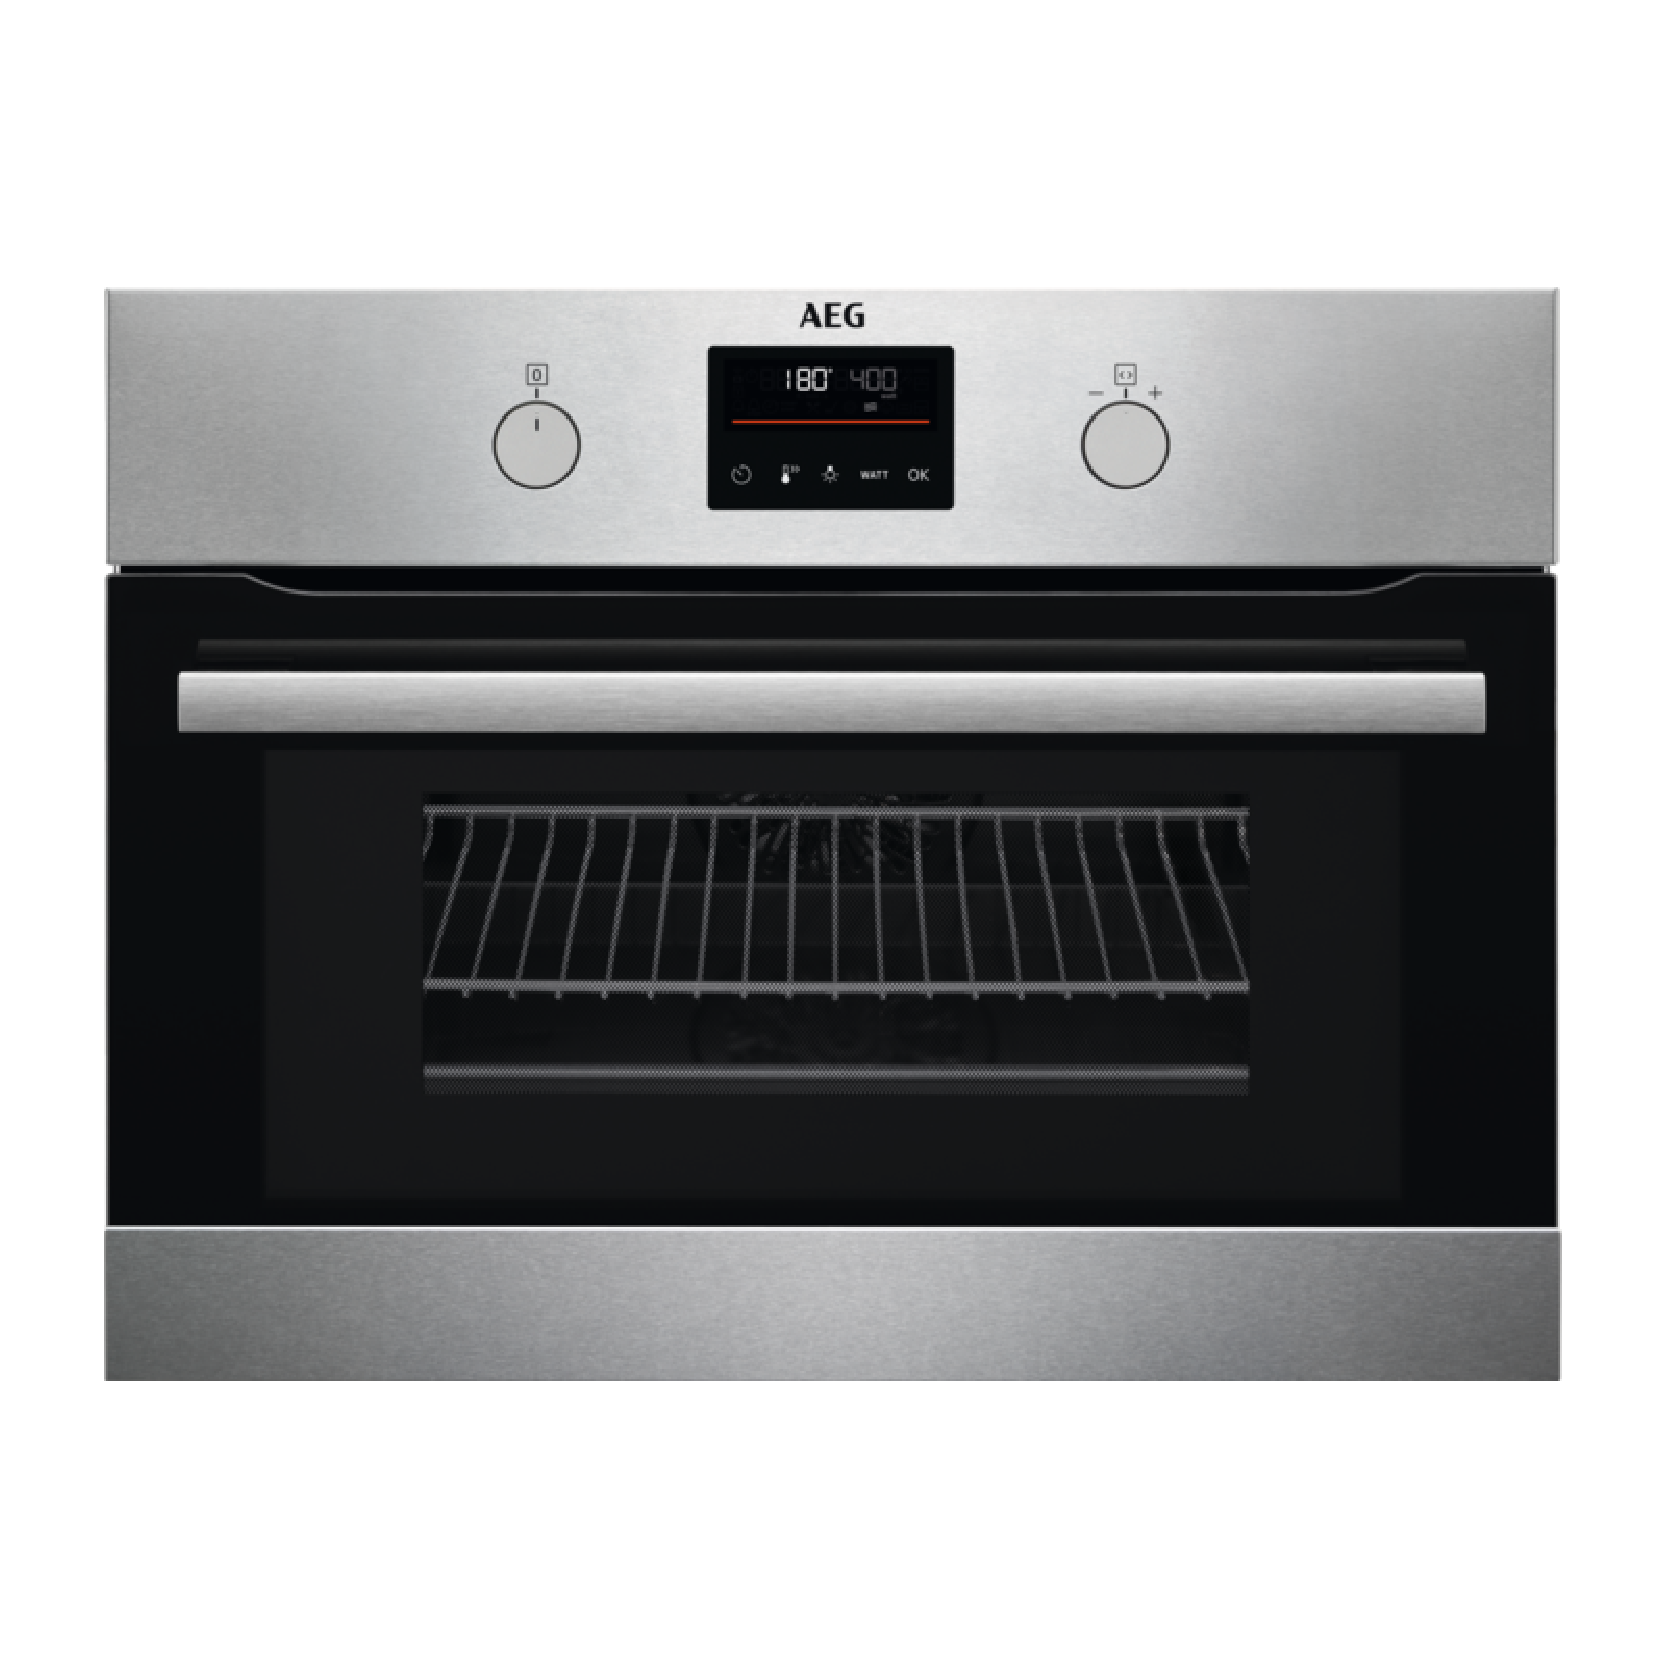 COMBIQUICK COMPACT MULTIFUNCTION OVEN WITH MICROWAVE AND ROTARY CONTROLS | KMK365060M